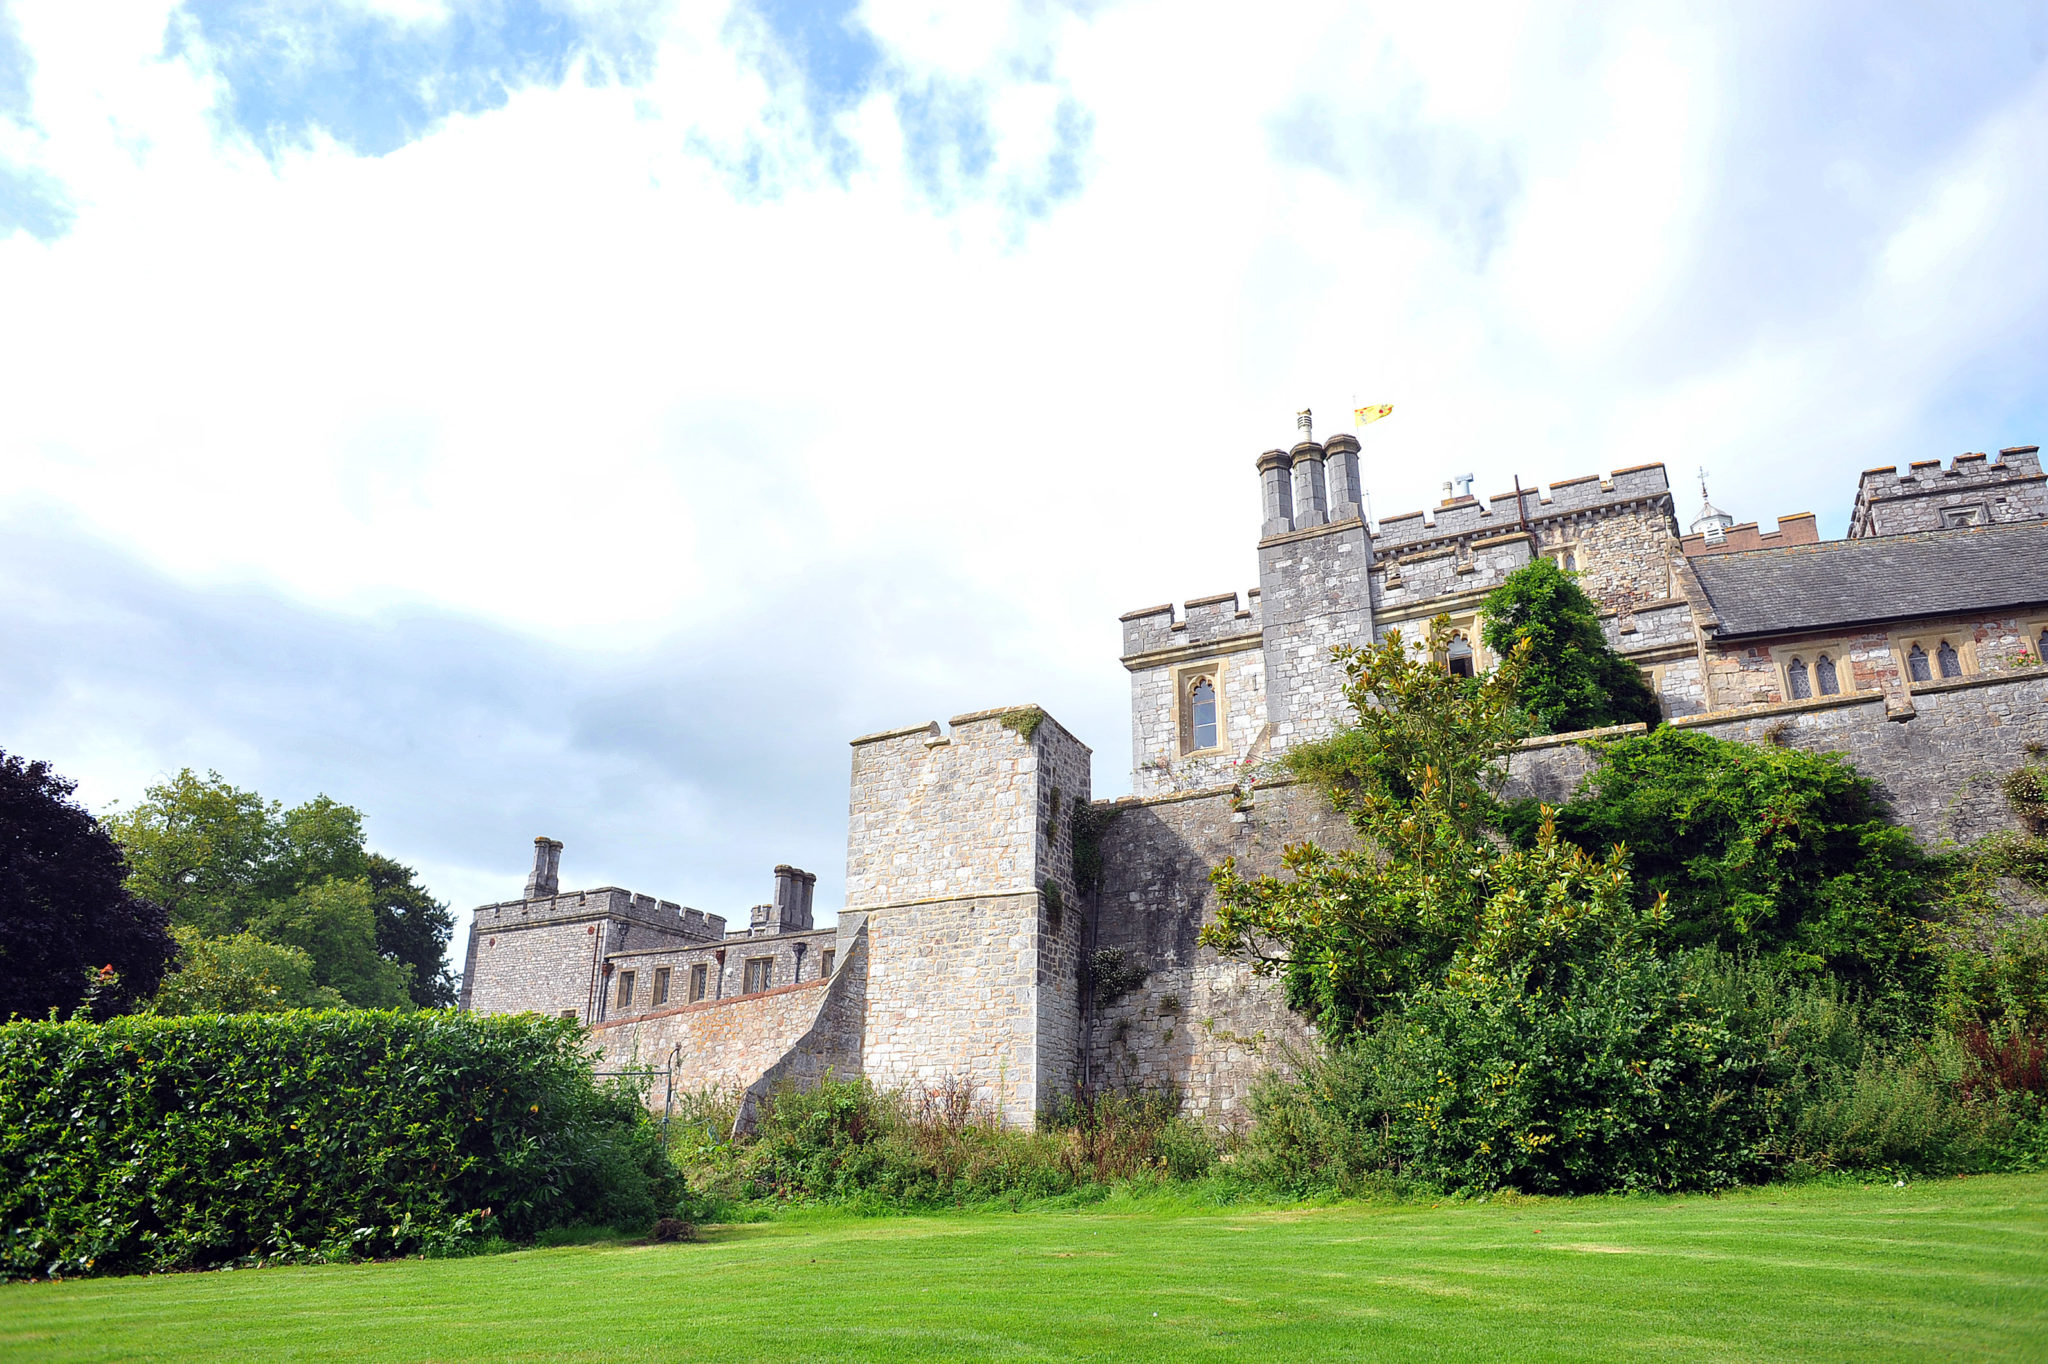 Restoration of Tower to Grade I Listed Historic Castle | Bovey ...